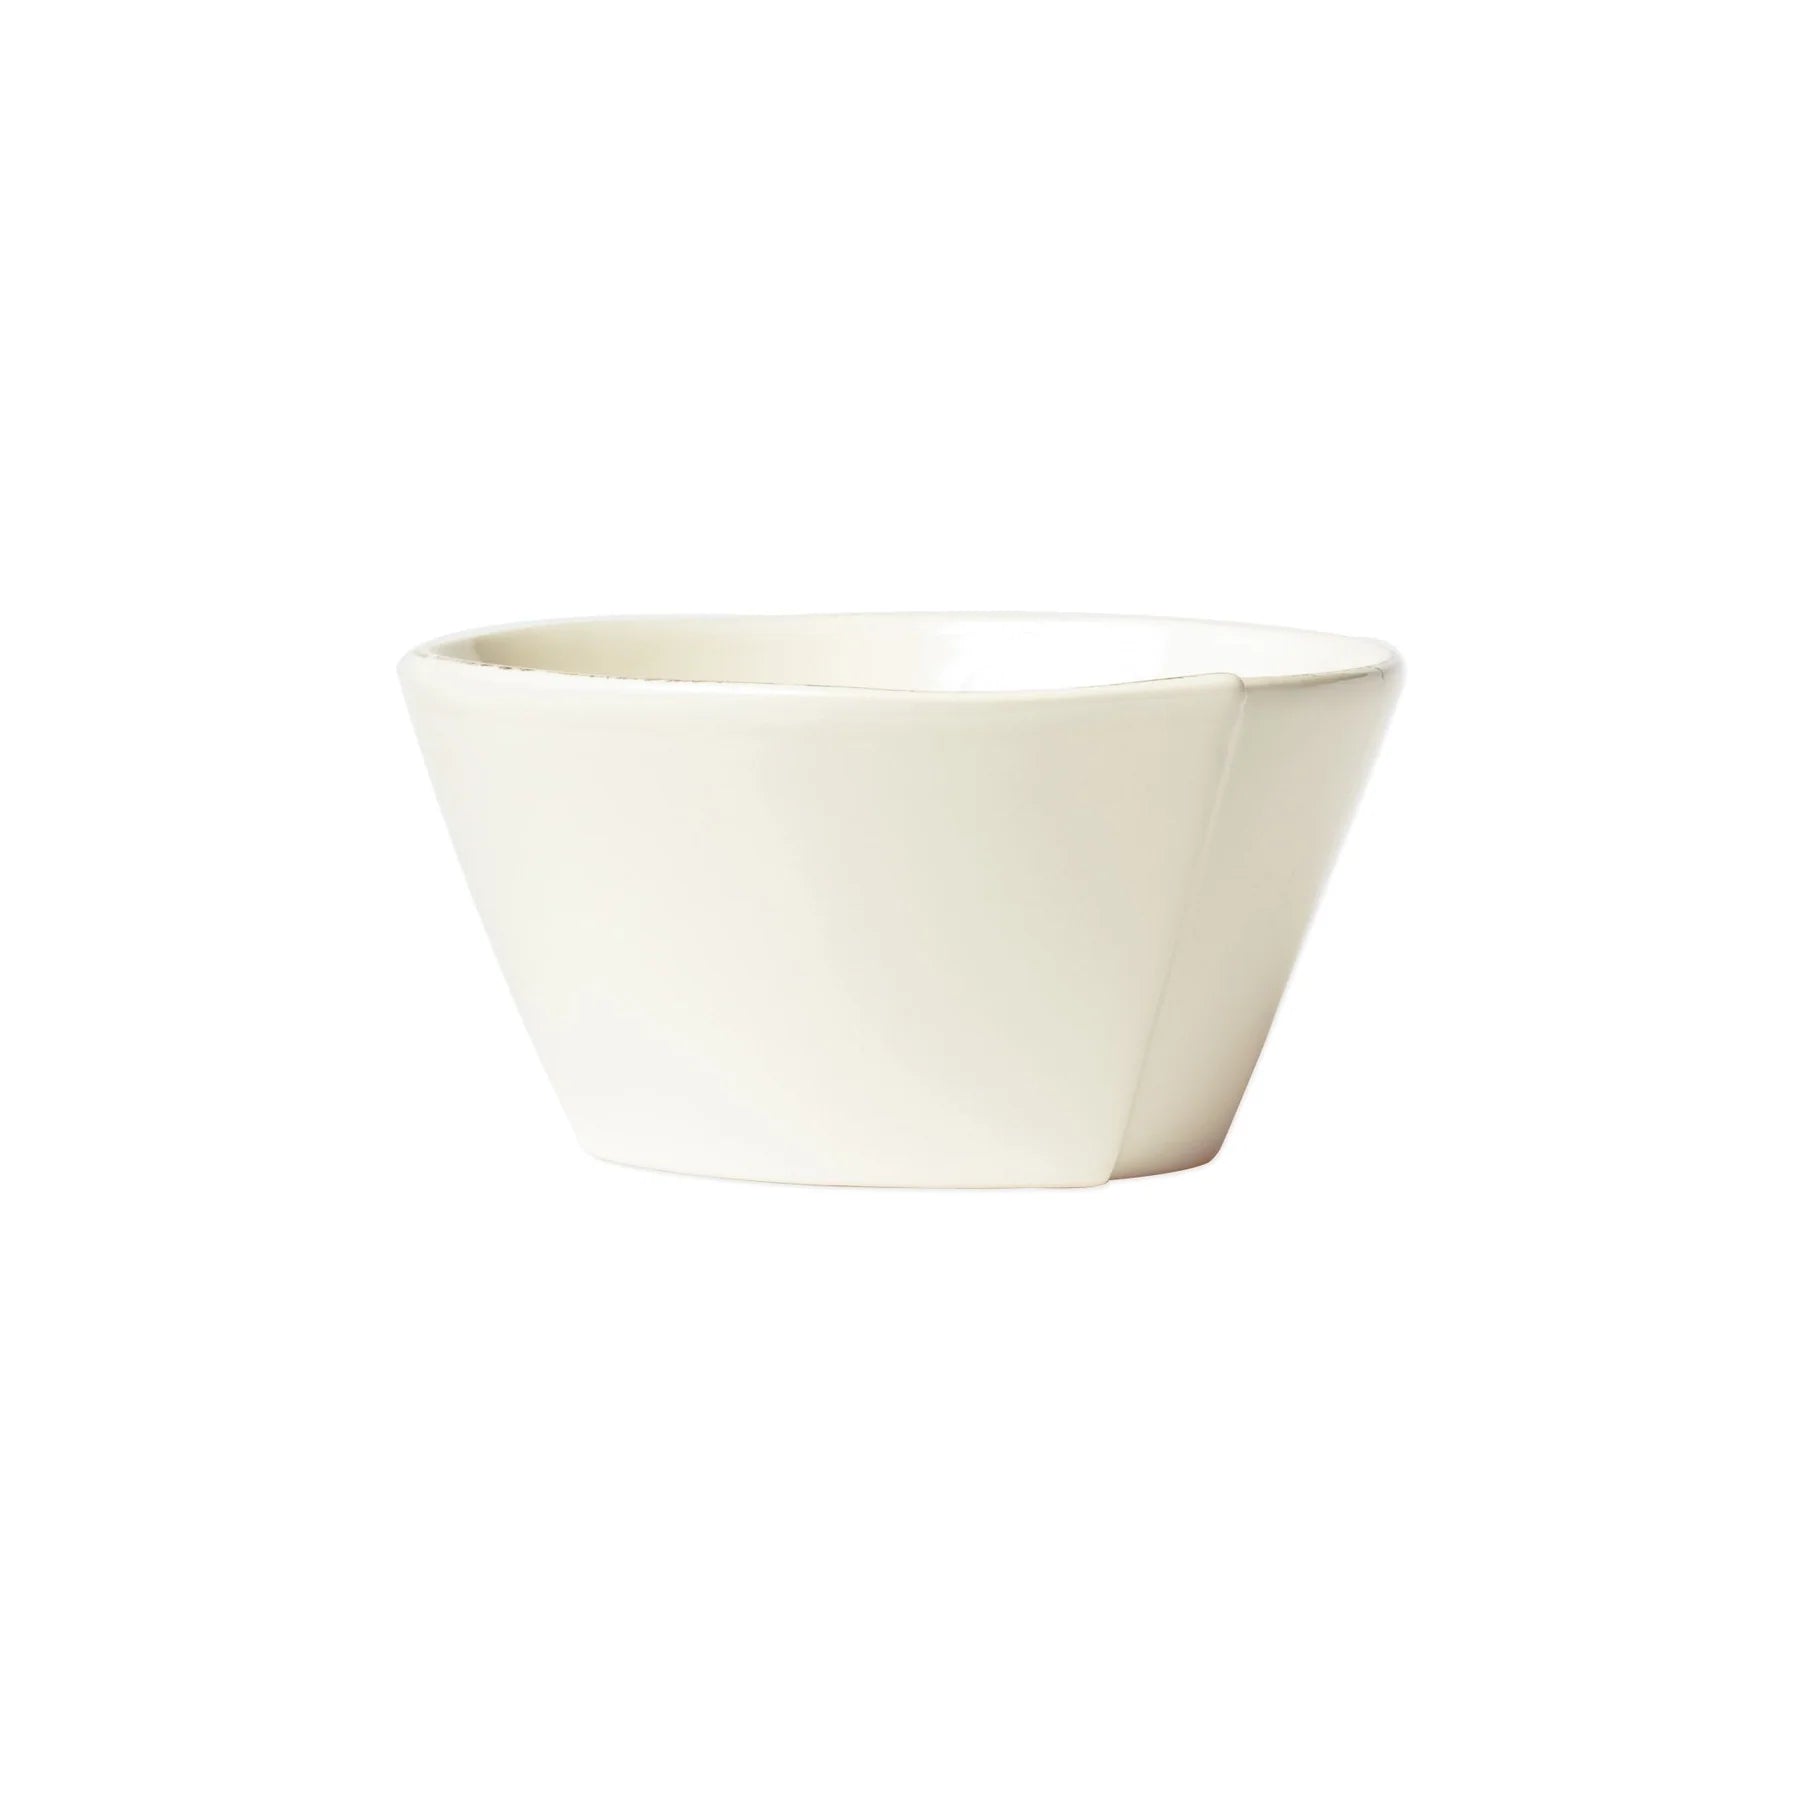 Vietri Lastra Linen colored cereal bowl on a white background